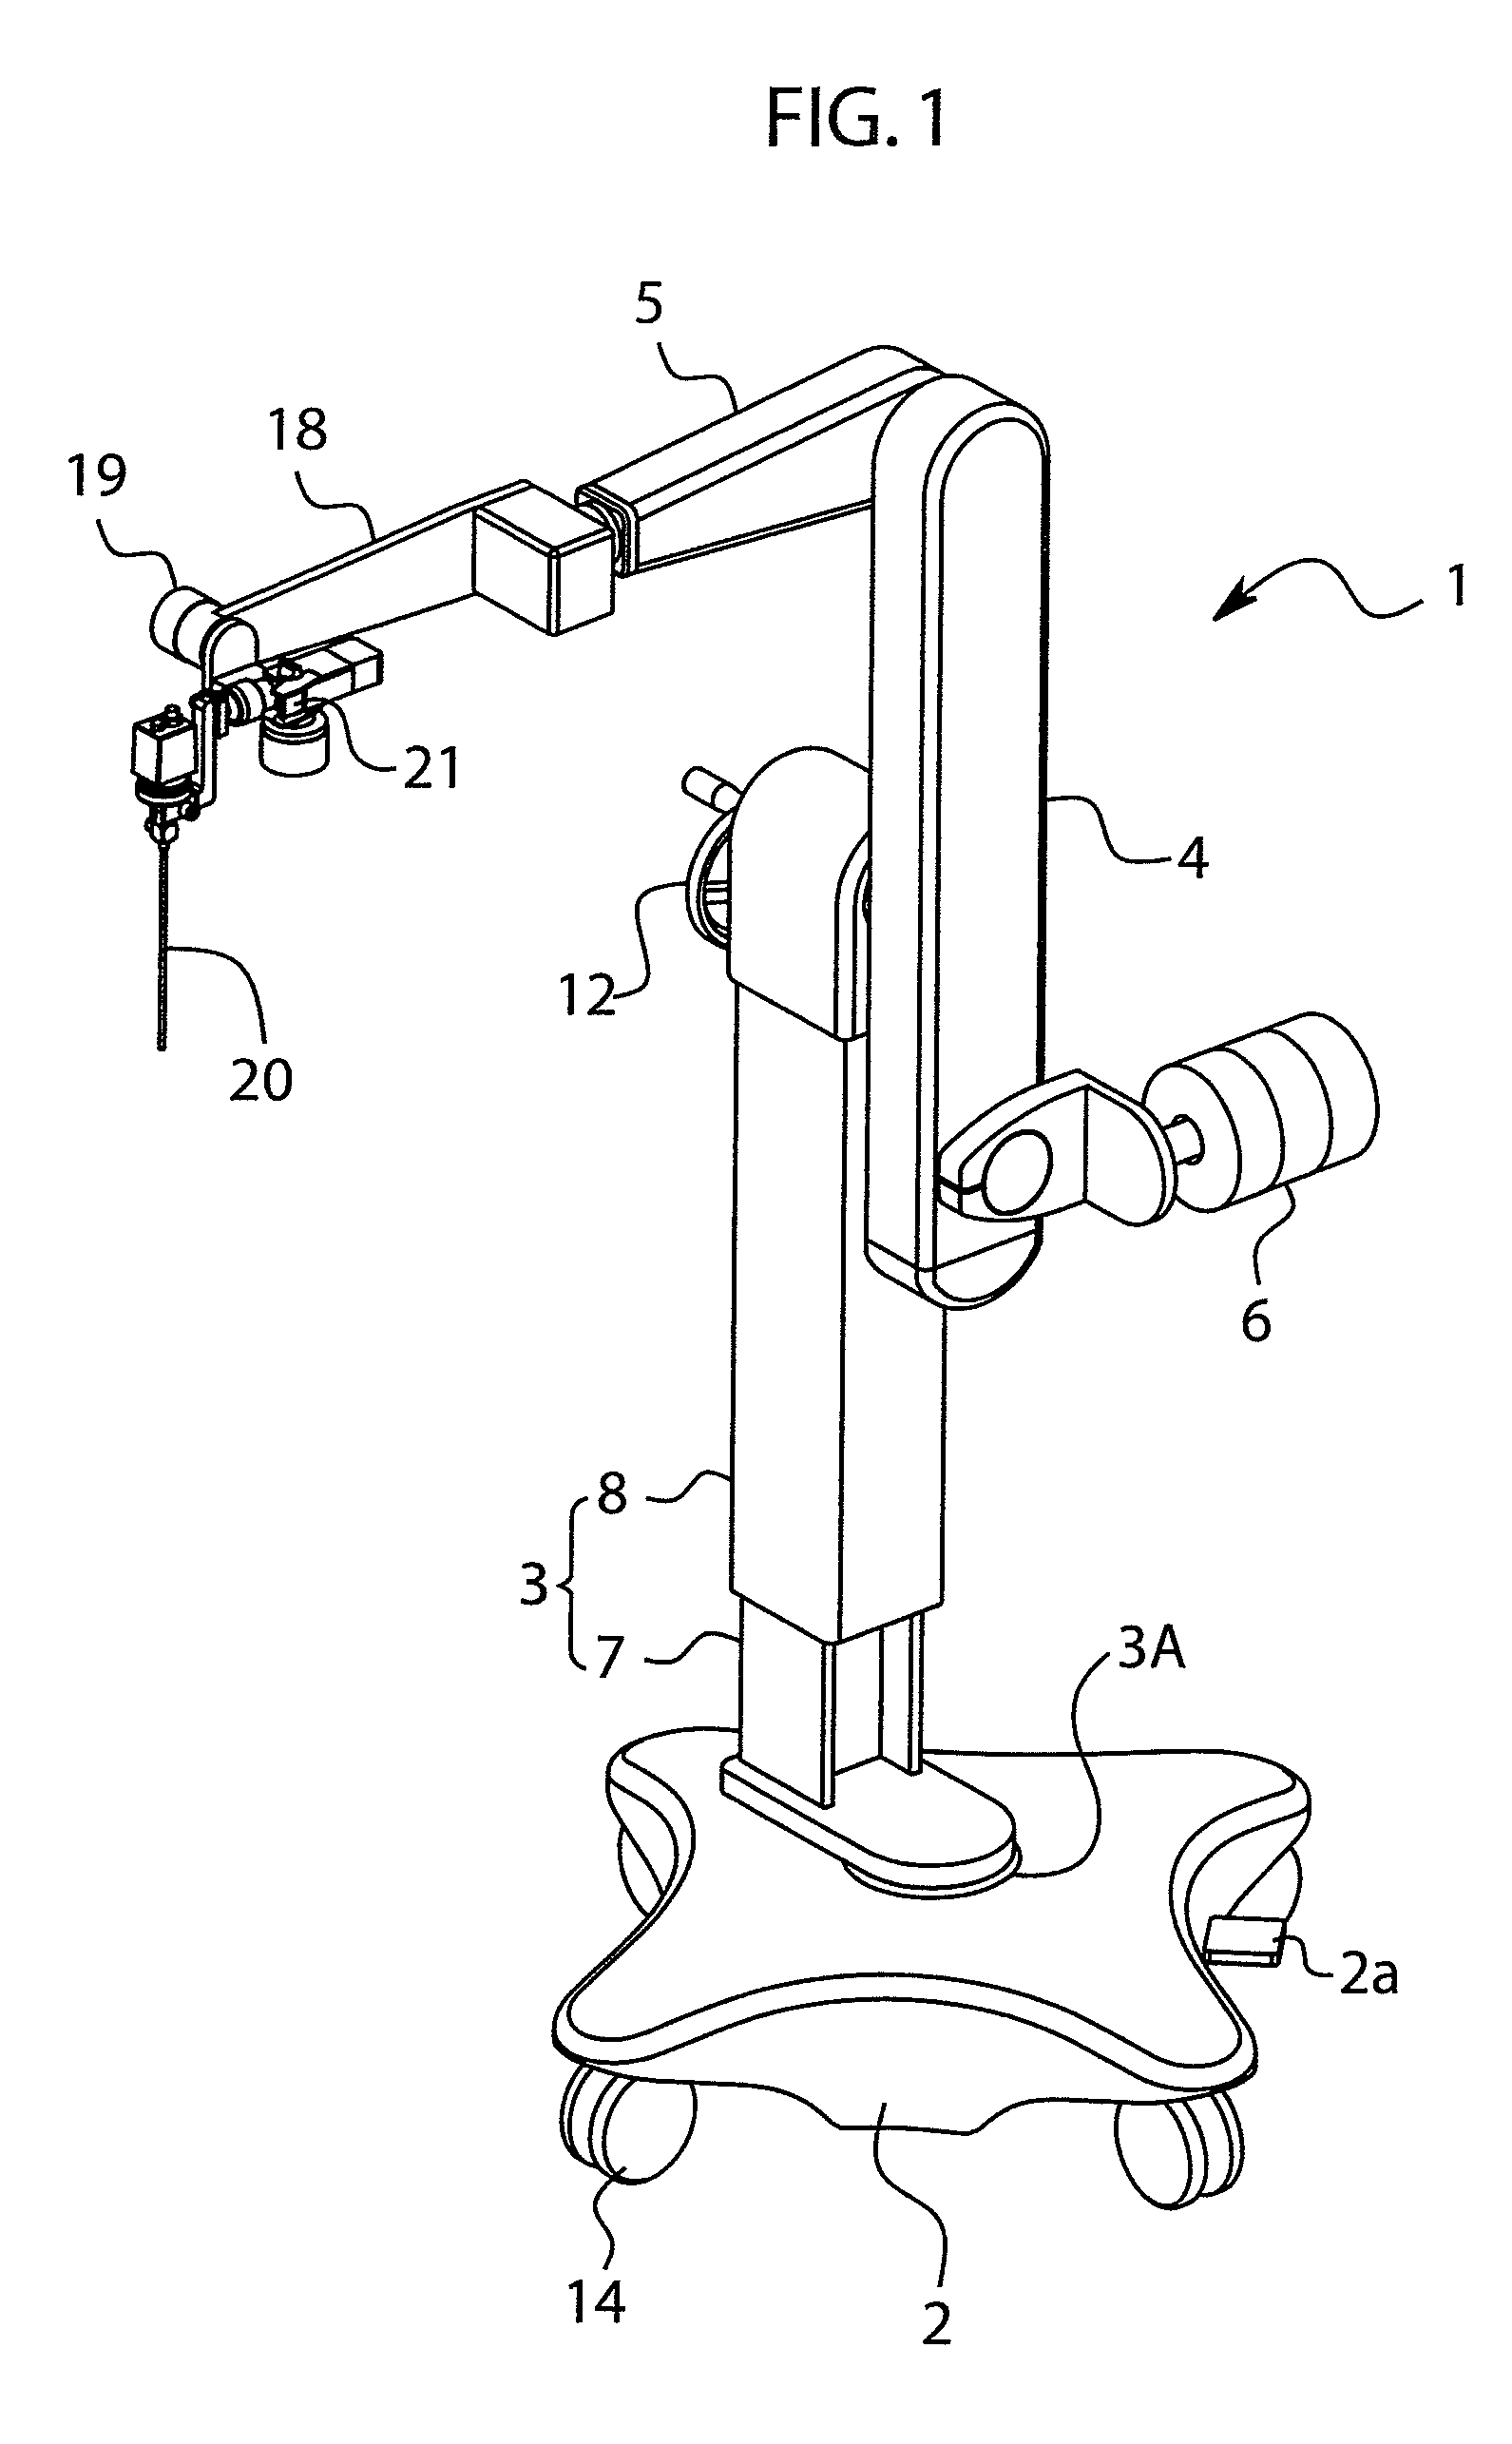 Holding arm apparatus for medical tool